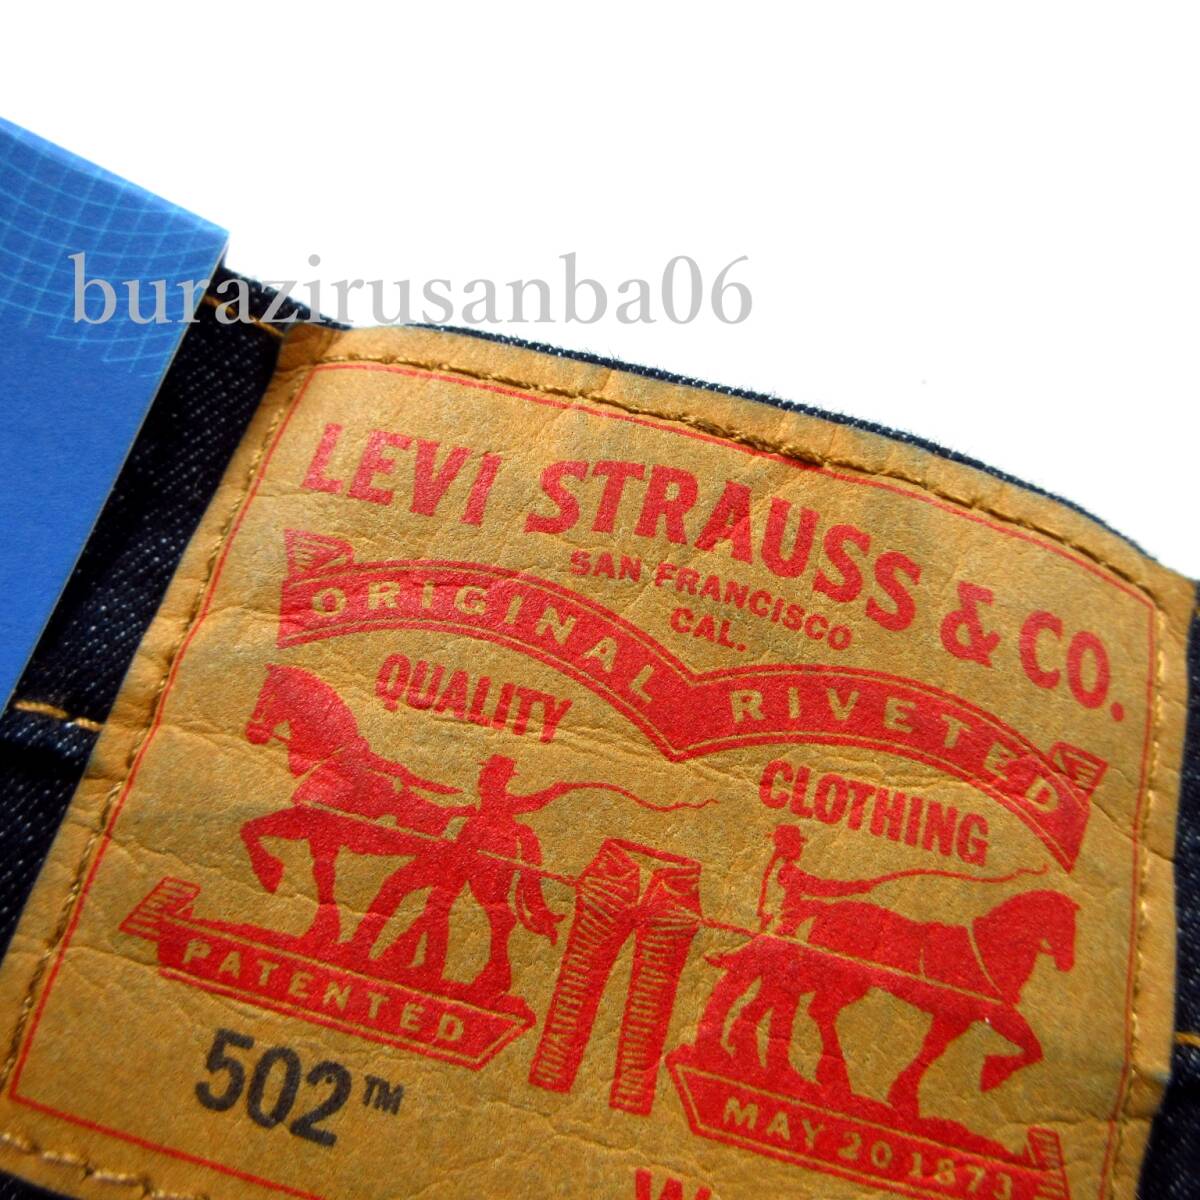  men's W33* unused Levi's Levi\'s 502 COOL stretch Denim pants jeans tapered spring summer ... pants 29507-1061